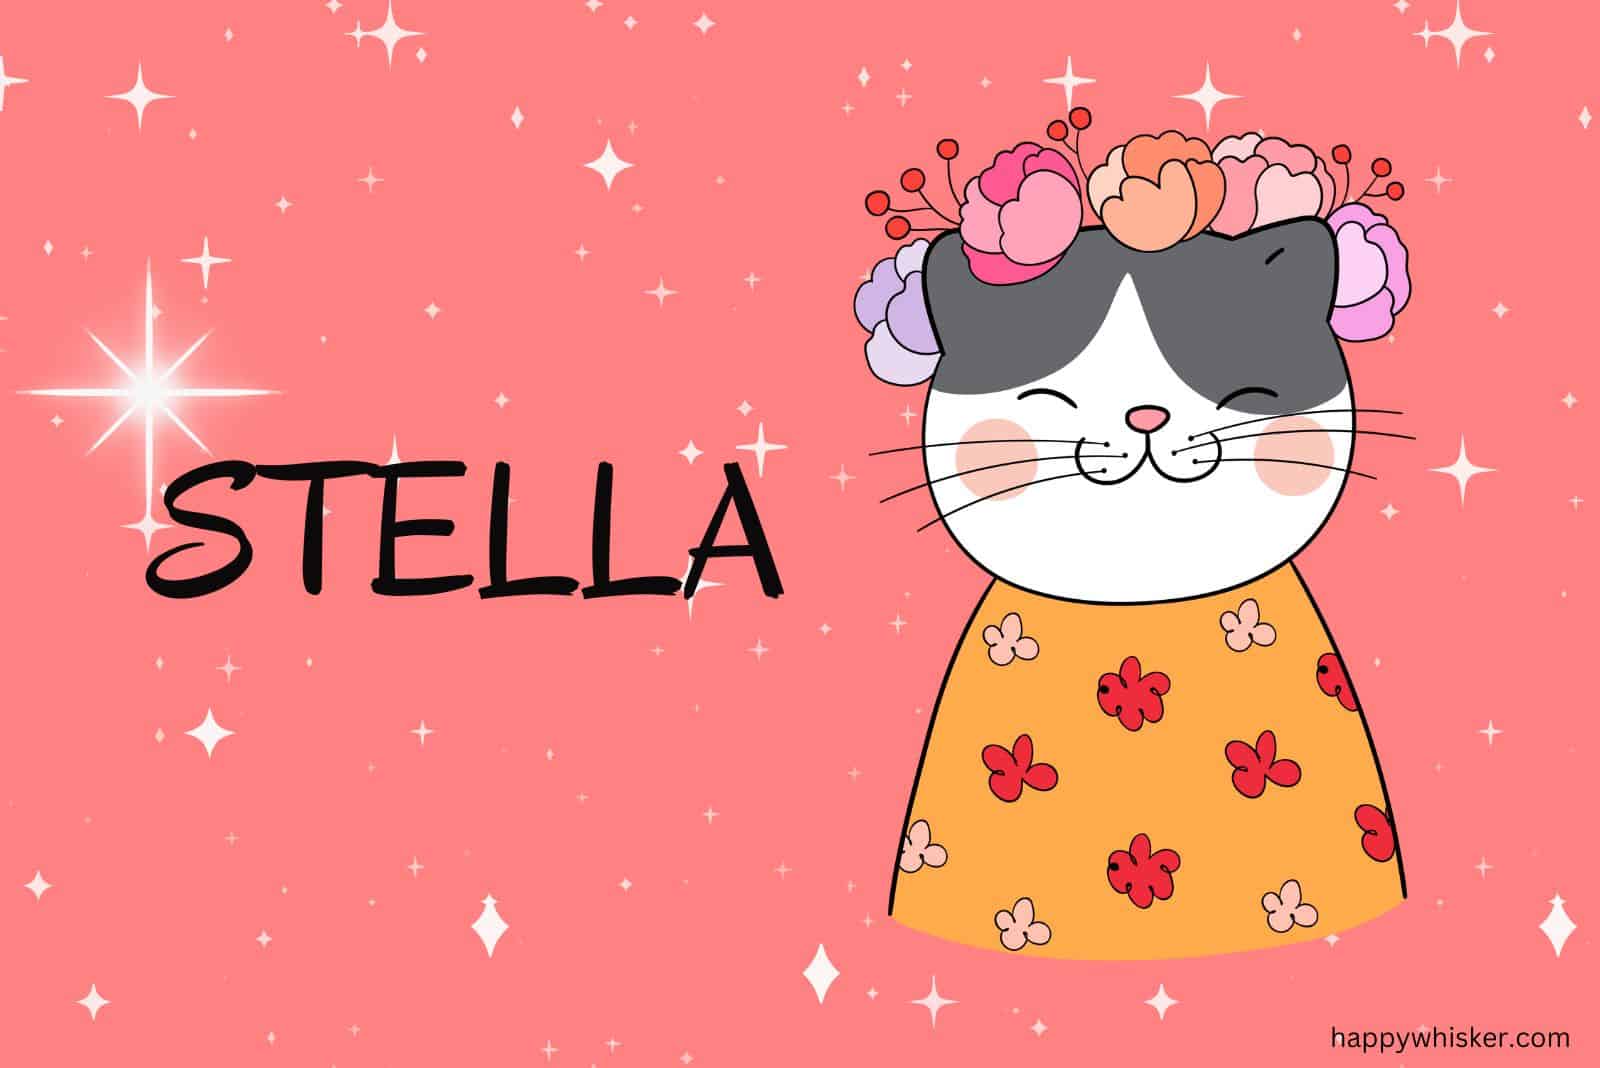 stella name and cat illustration